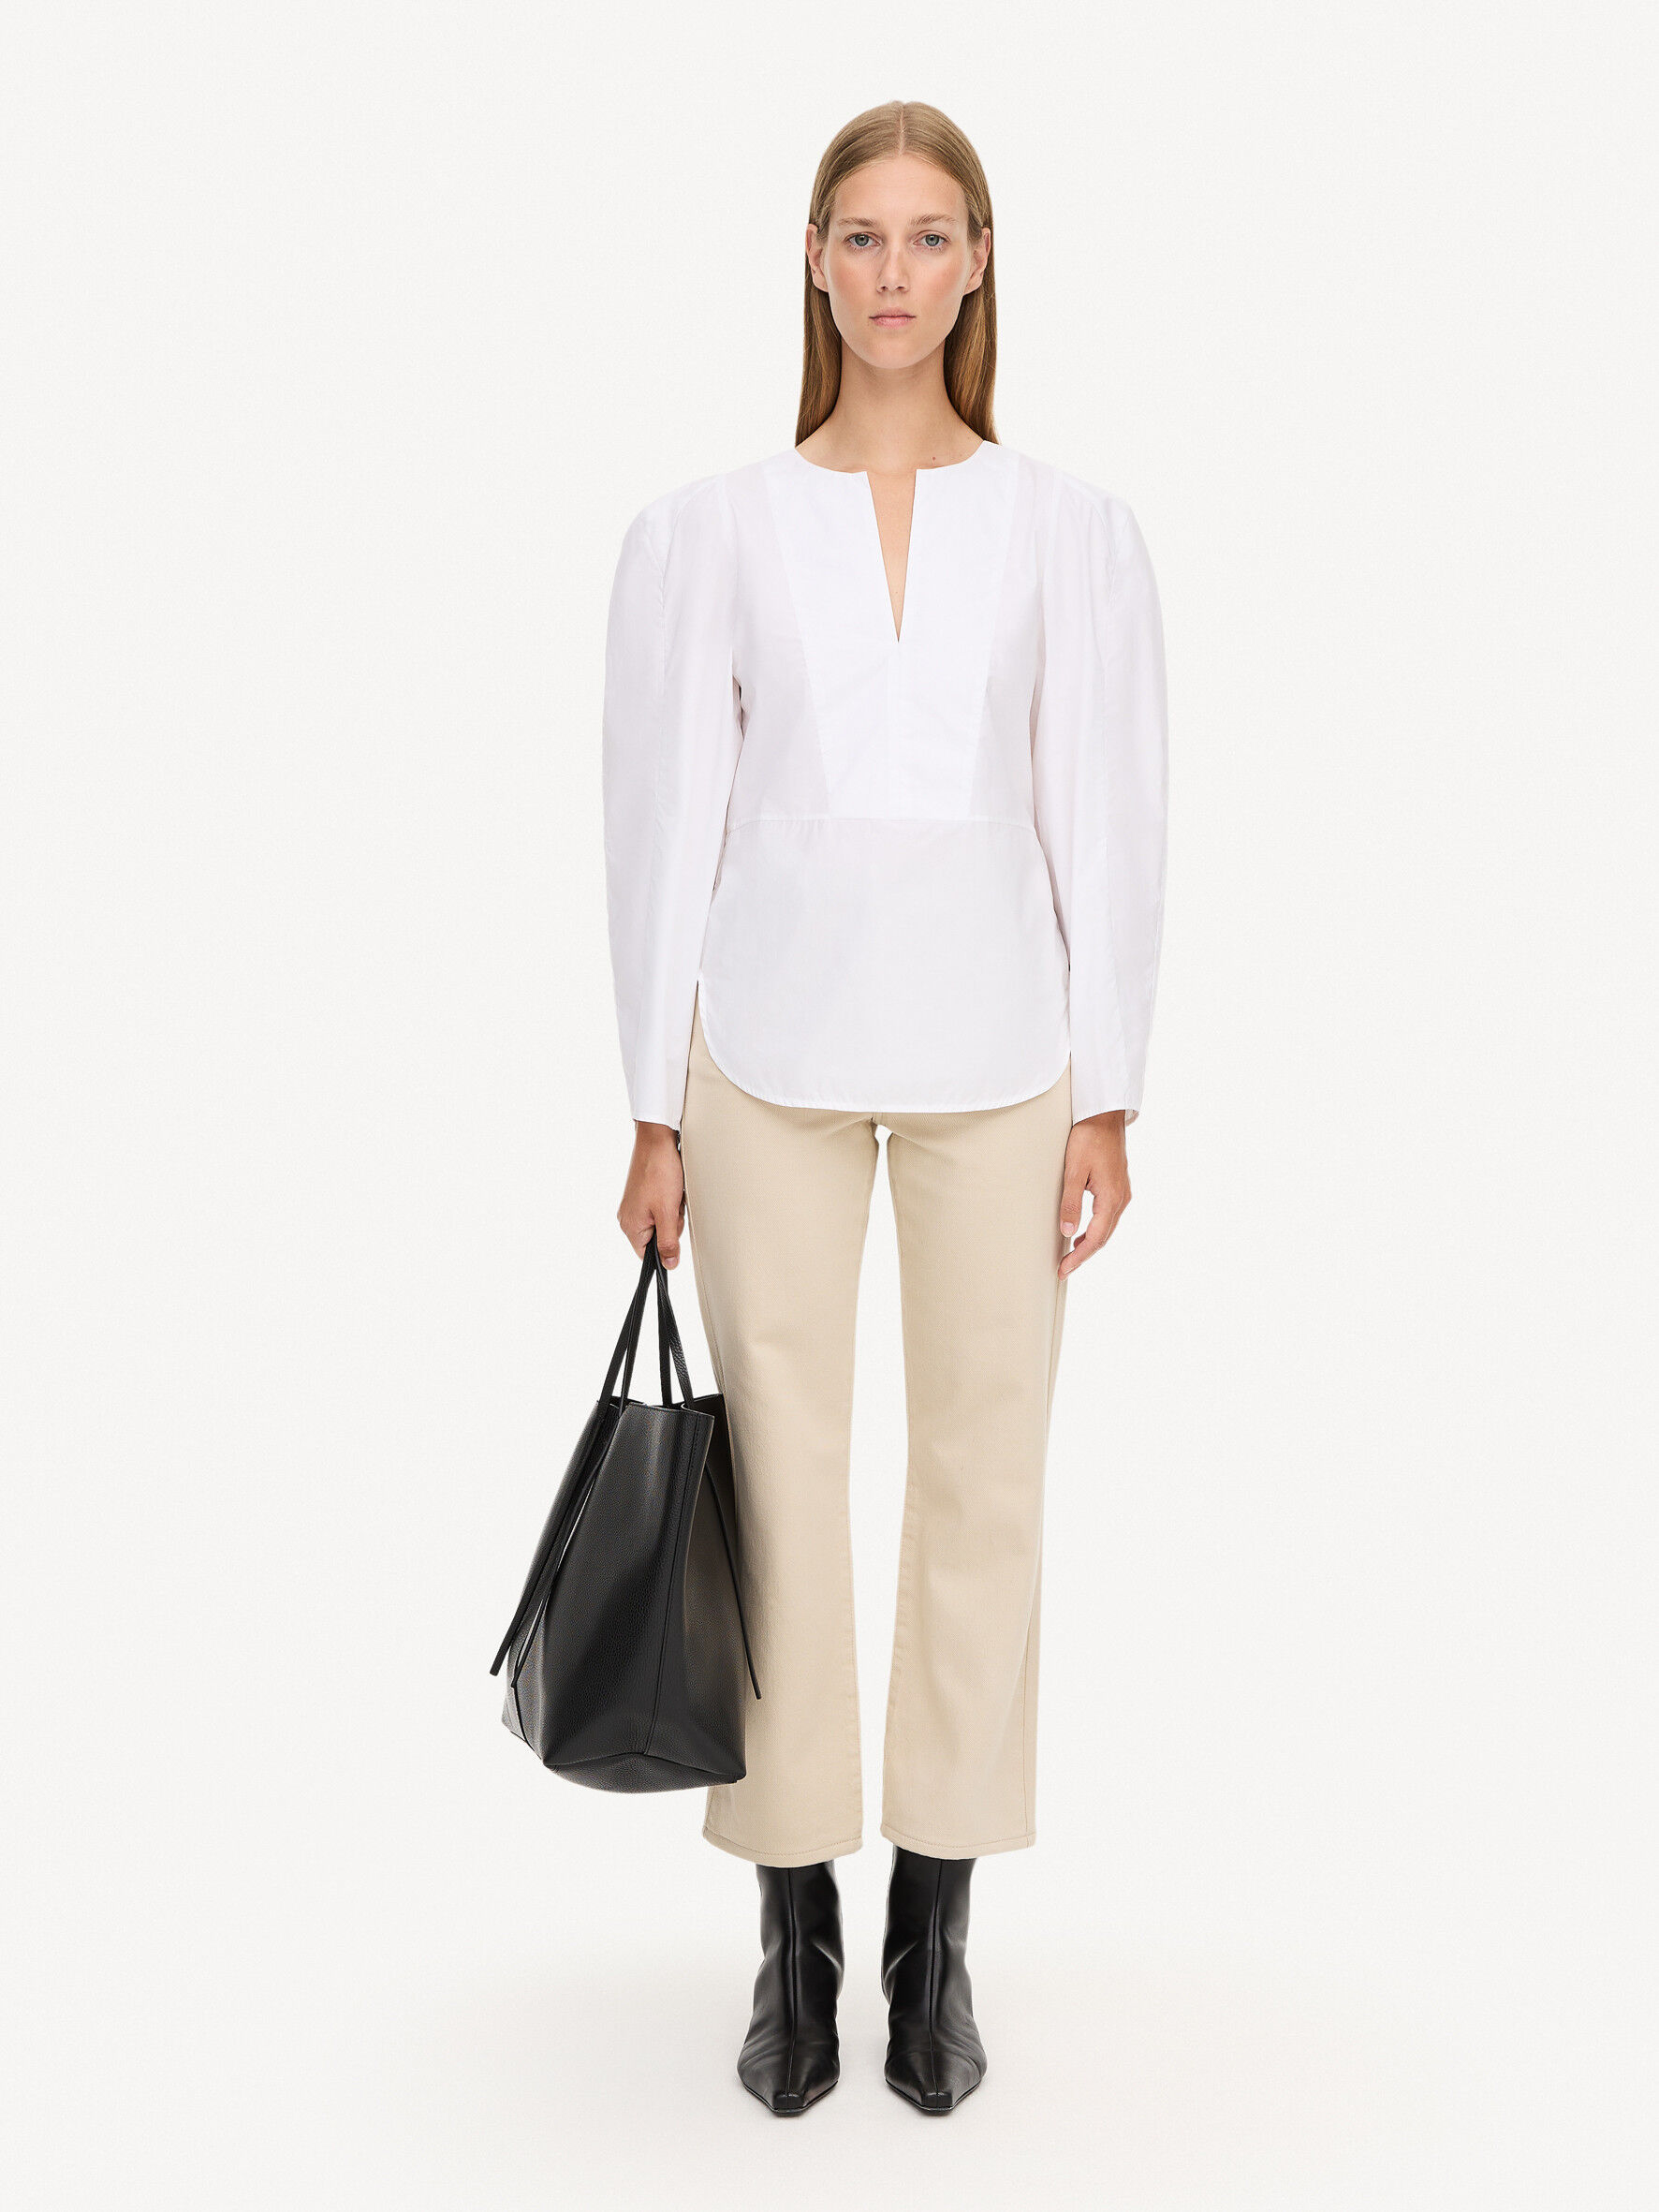 Emely blouse - Buy Clothing online